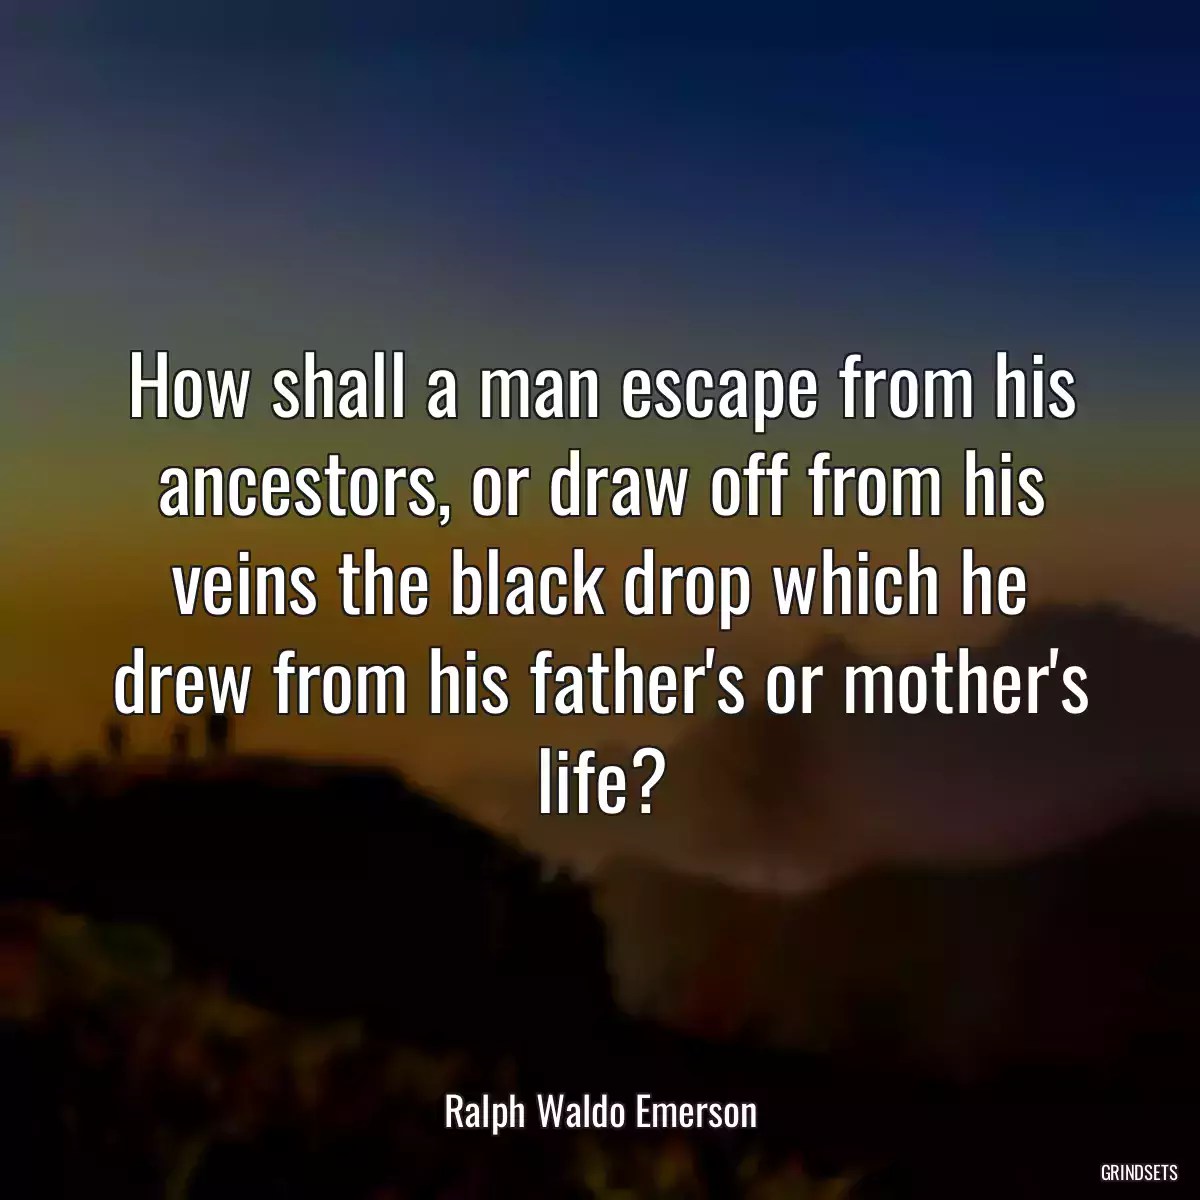 How shall a man escape from his ancestors, or draw off from his veins the black drop which he drew from his father\'s or mother\'s life?